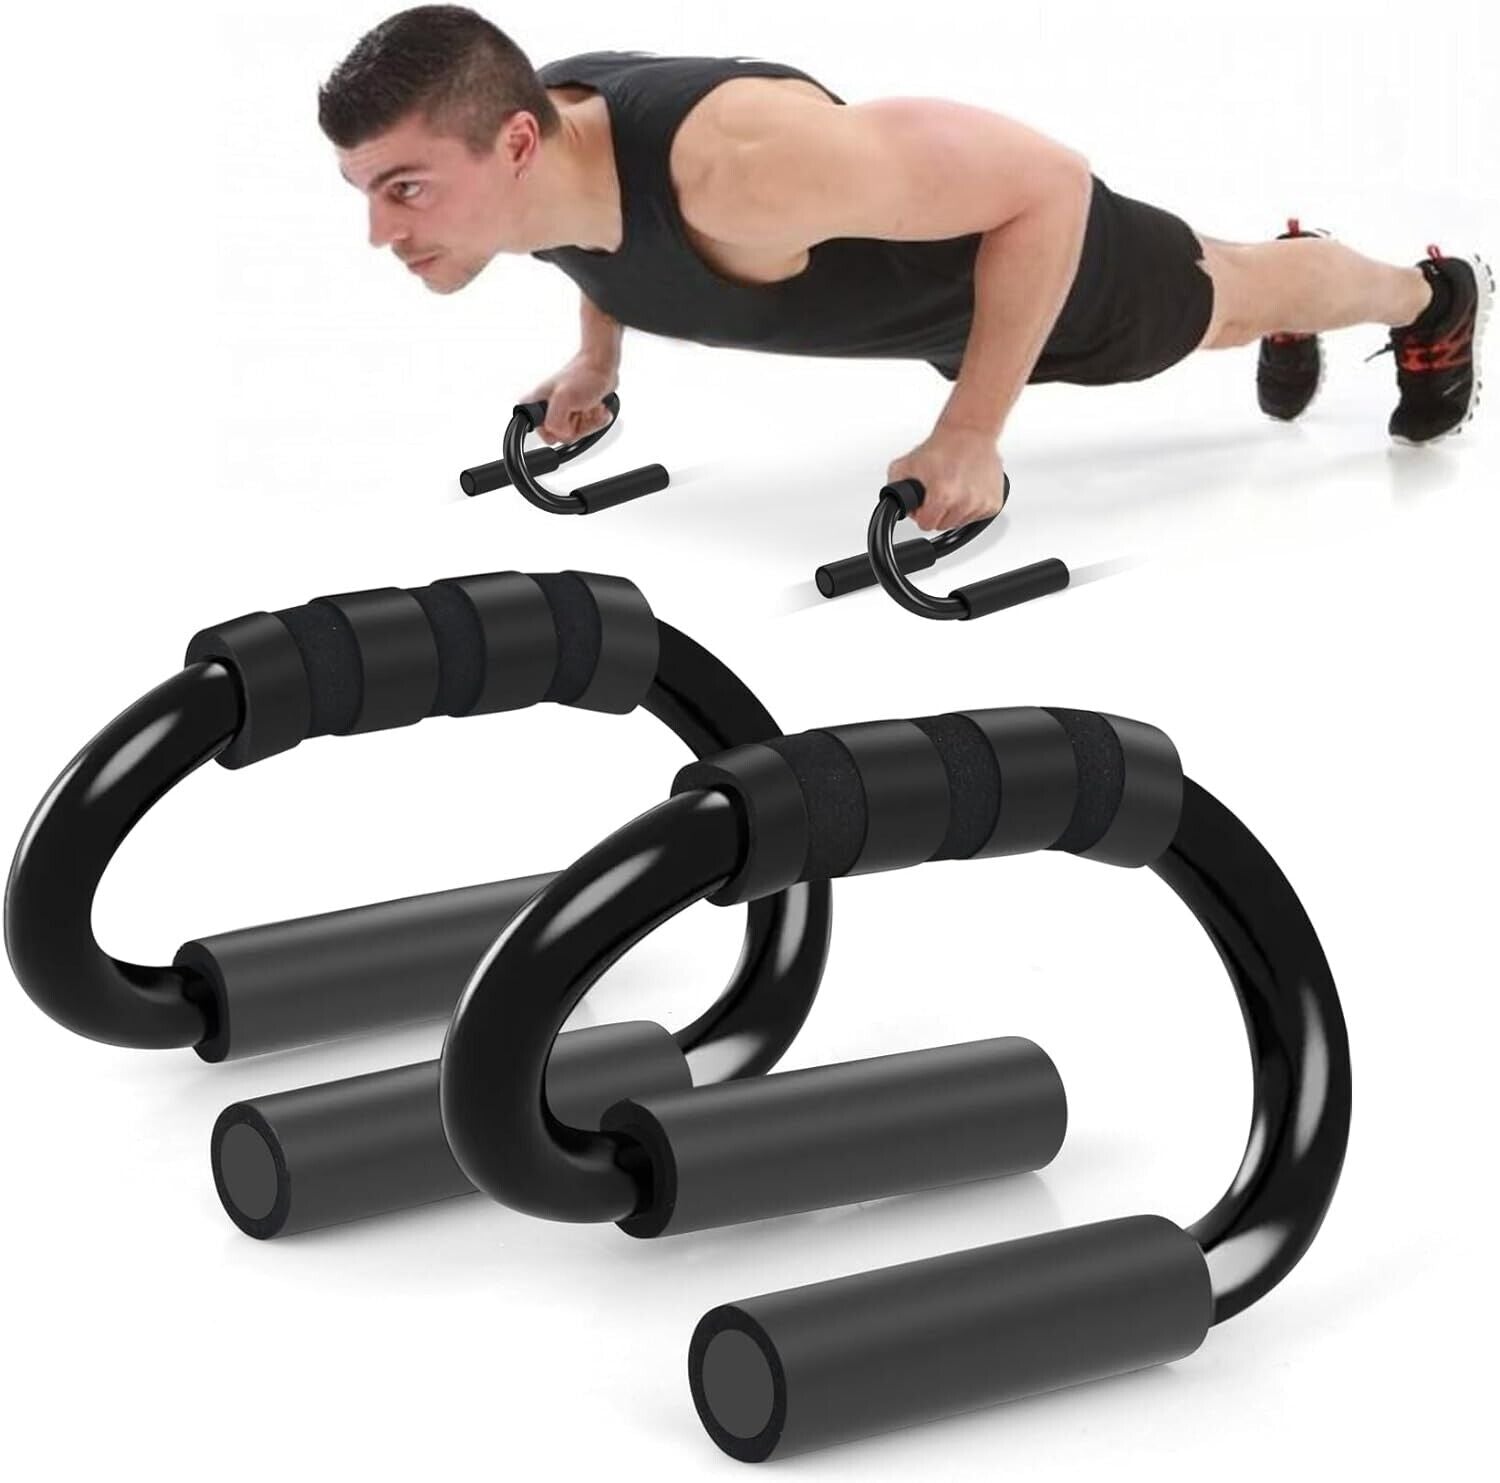 Push Up Bar S Shapes Non-slip Fitness Stand Exercise Grips Strength Workout Equipment Home Gym